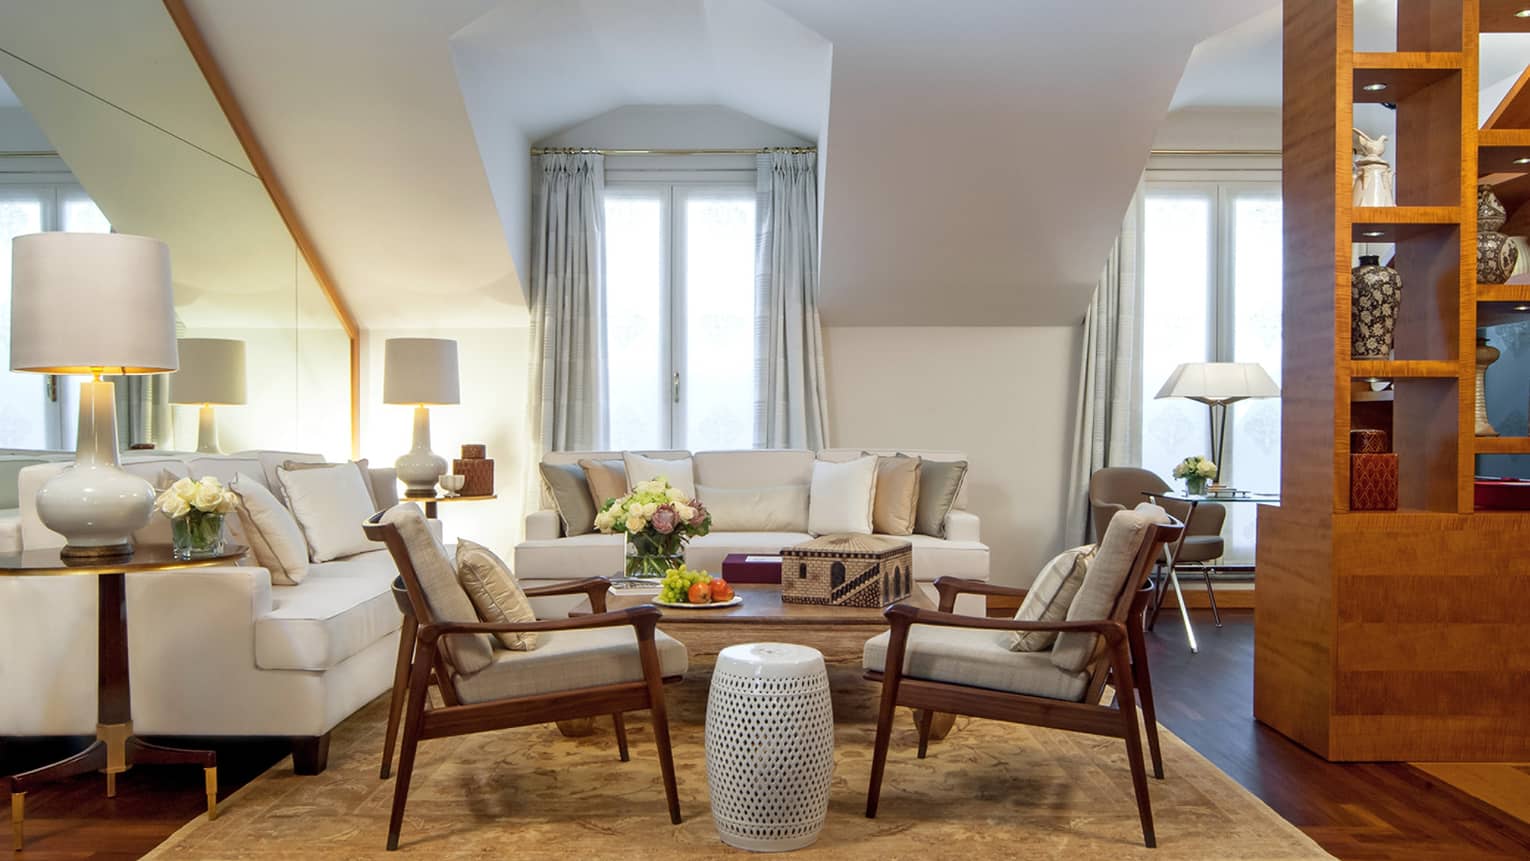 Hotel suite with white sofa seating vignette and two armchairs flanking white garden stool